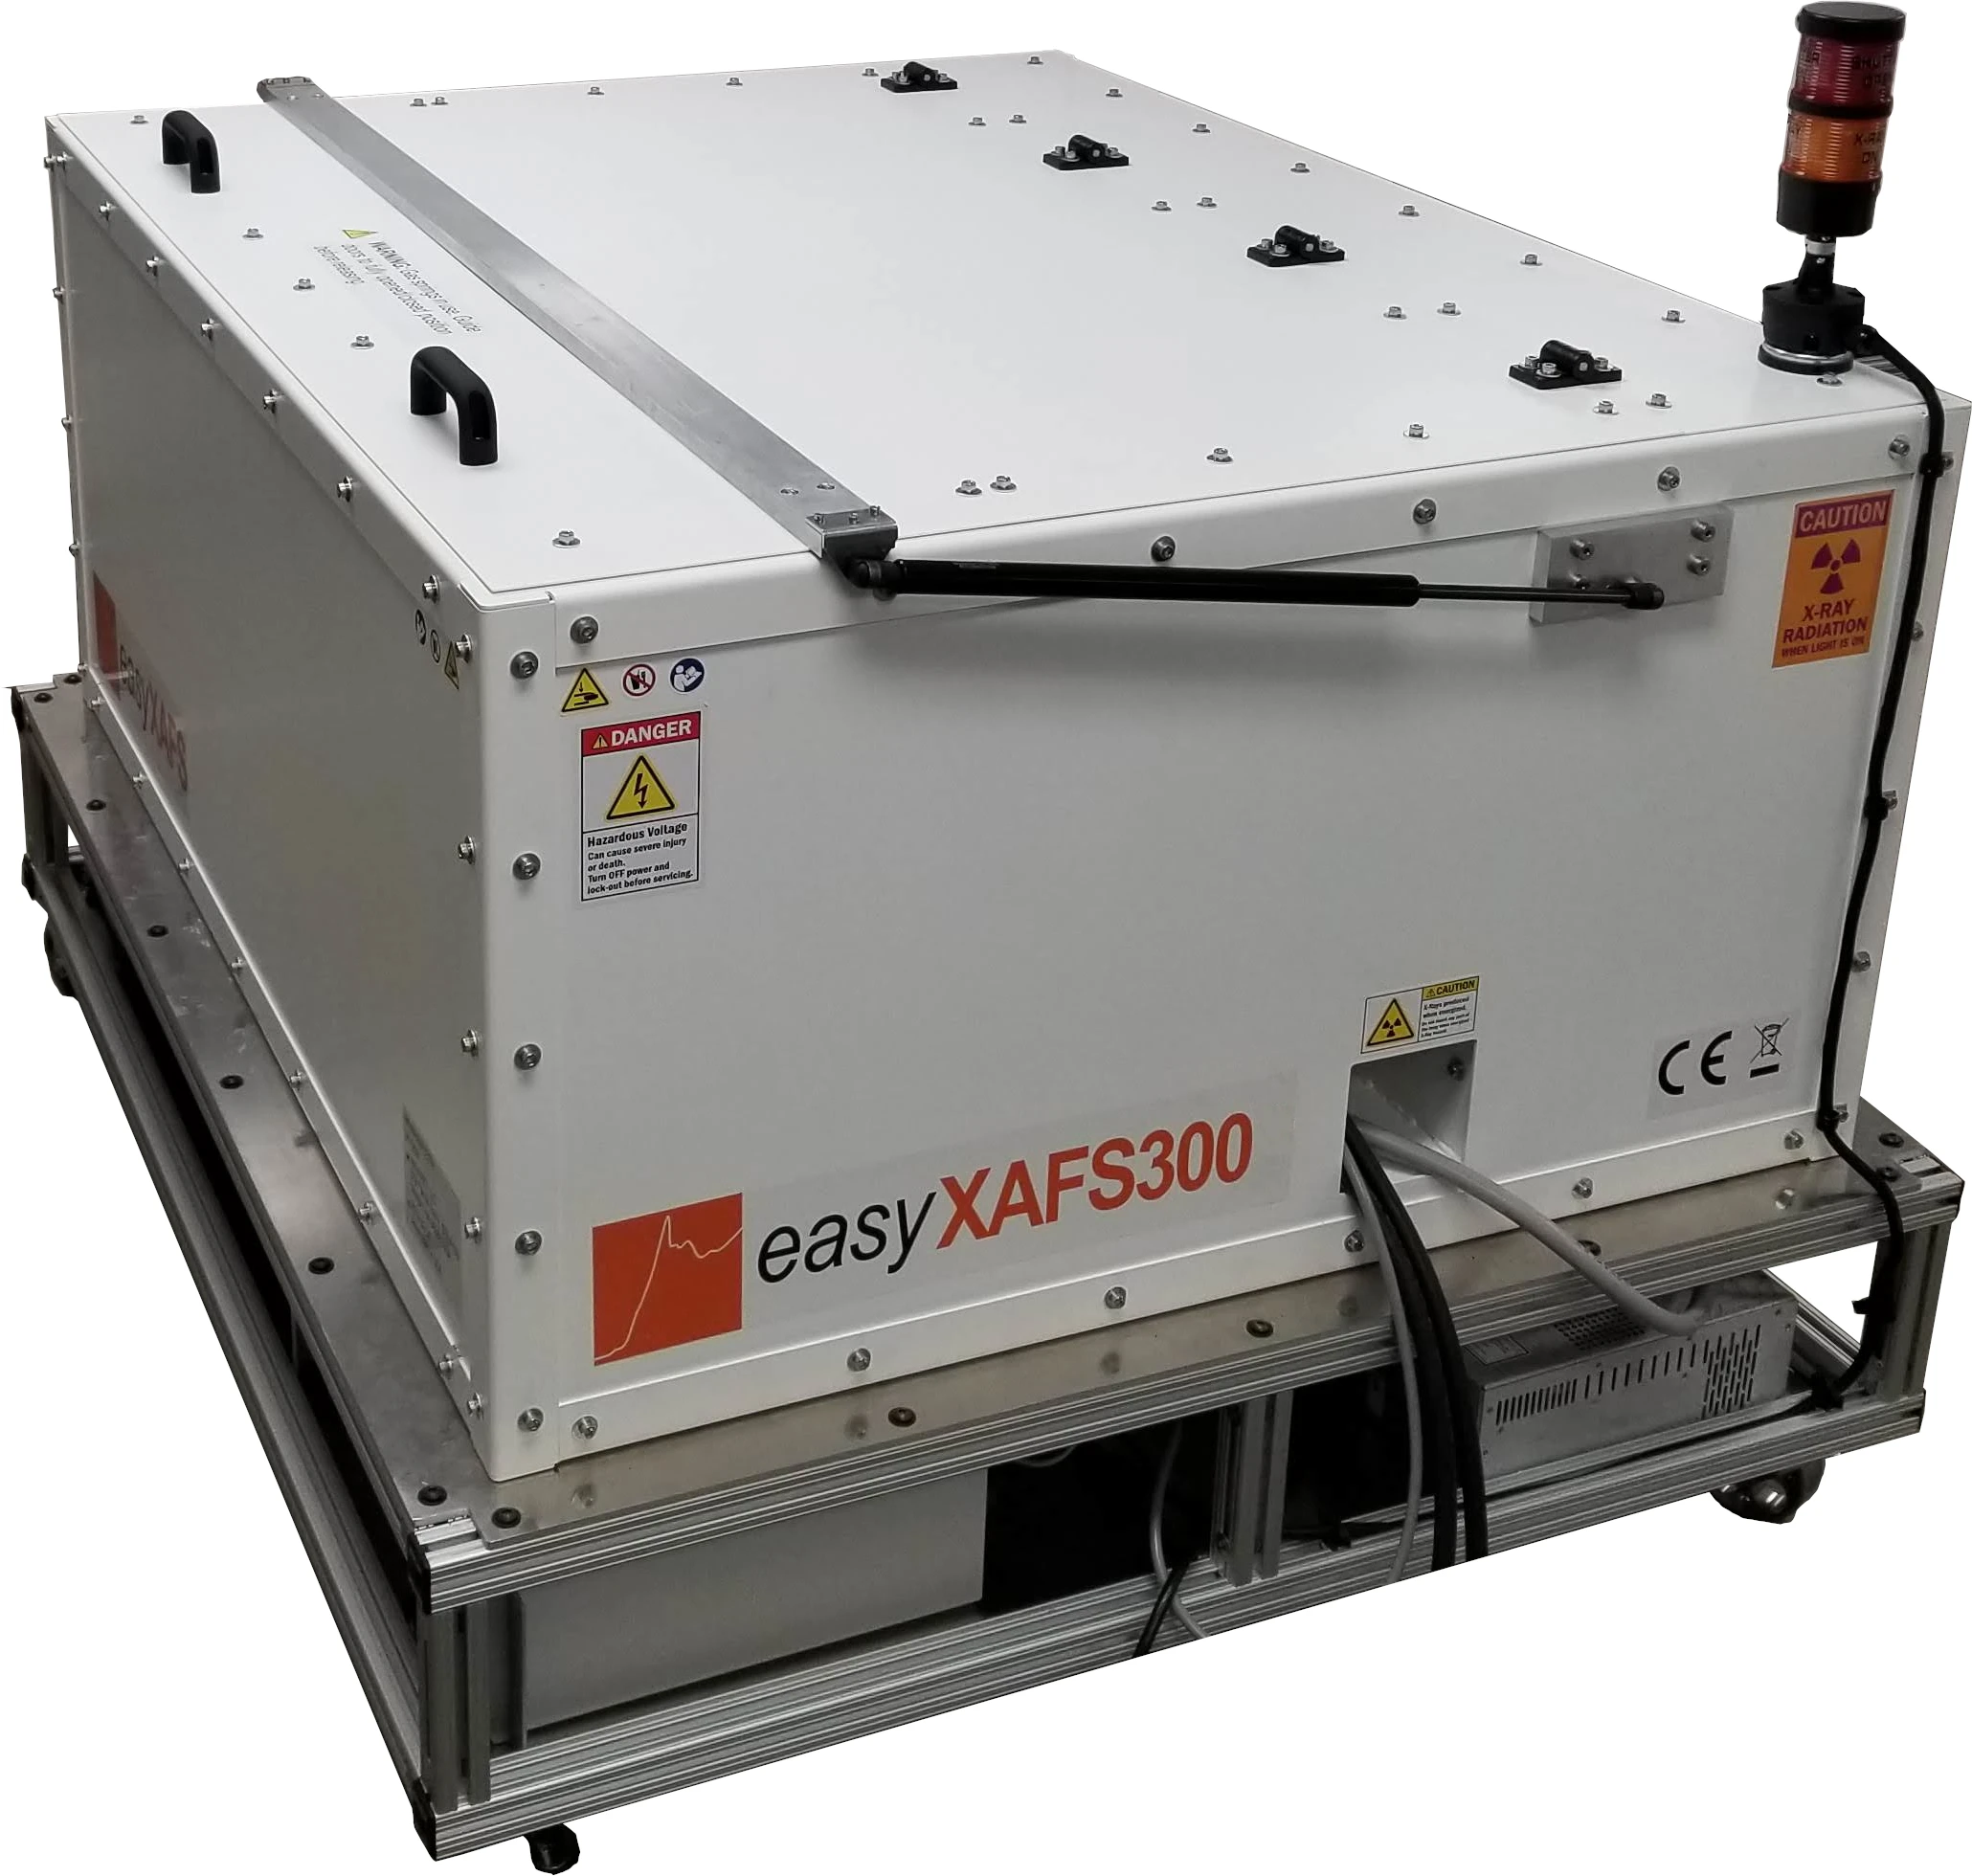 easyXAFS300  X-ray Absorption (XAS) Spectrometer from easyXAFS, LLC.